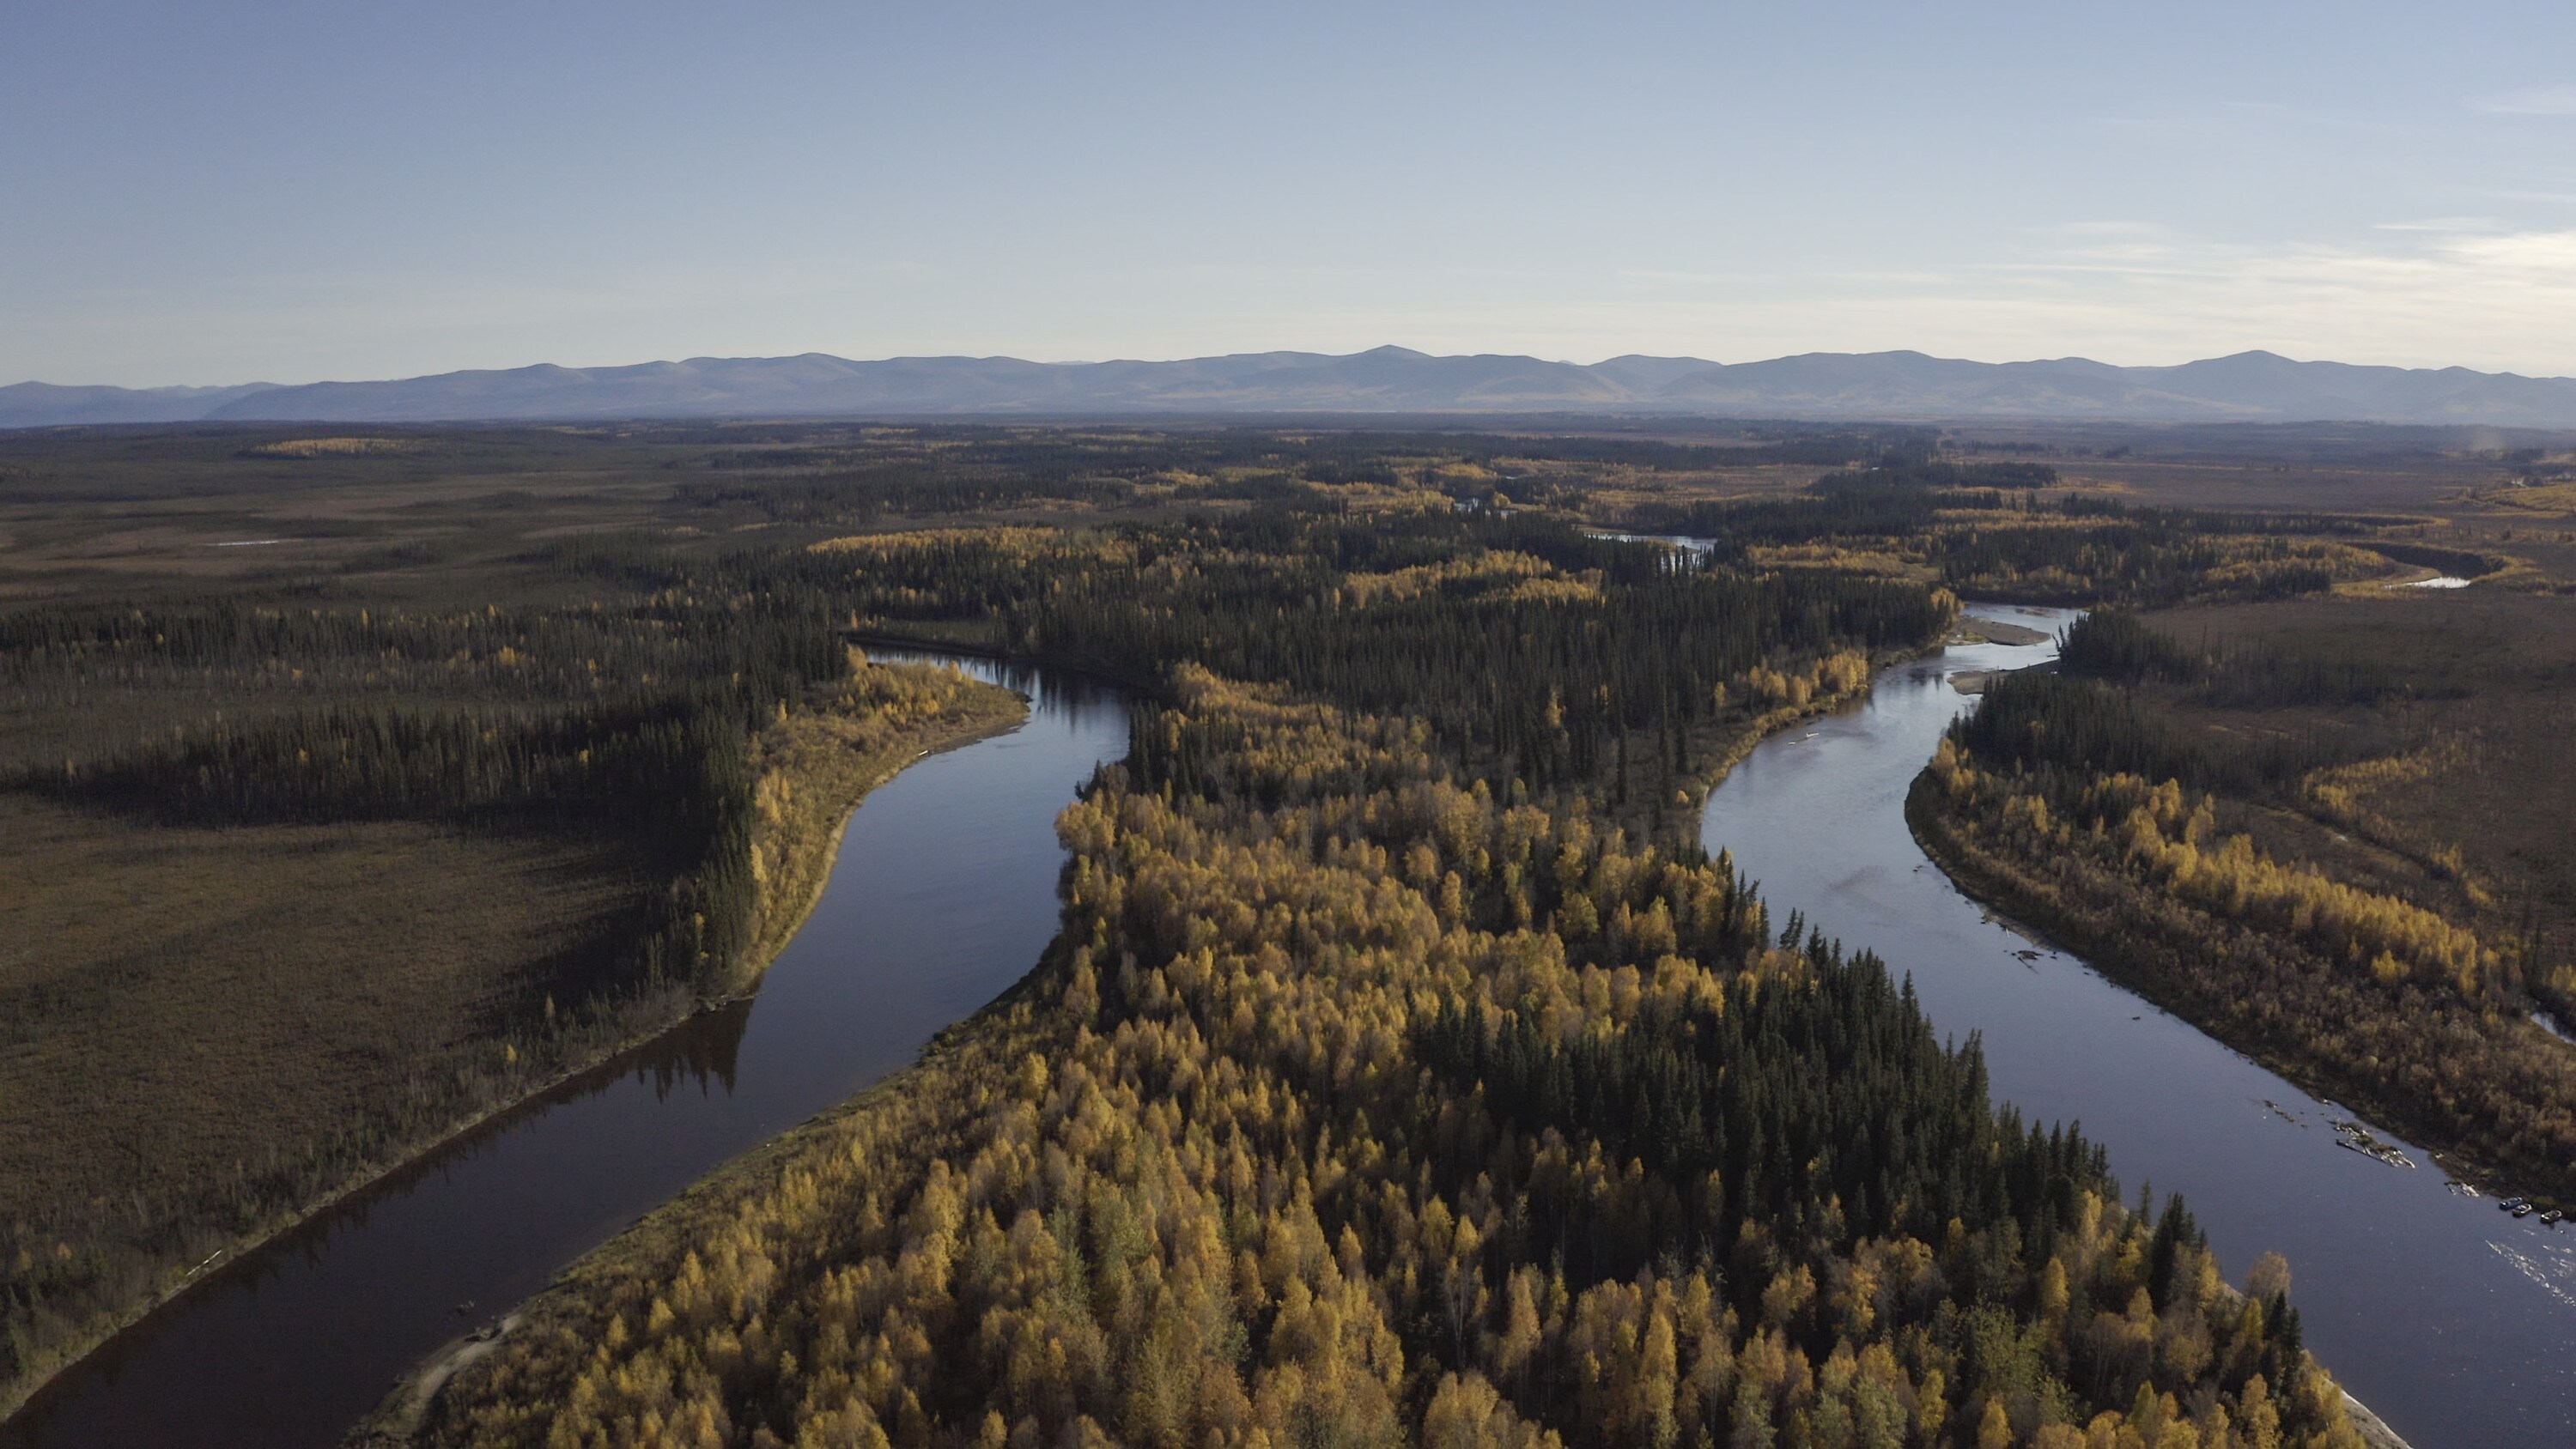 The Yukon River winding through the boreal forest. (National Geographic/Austin Ferguson)